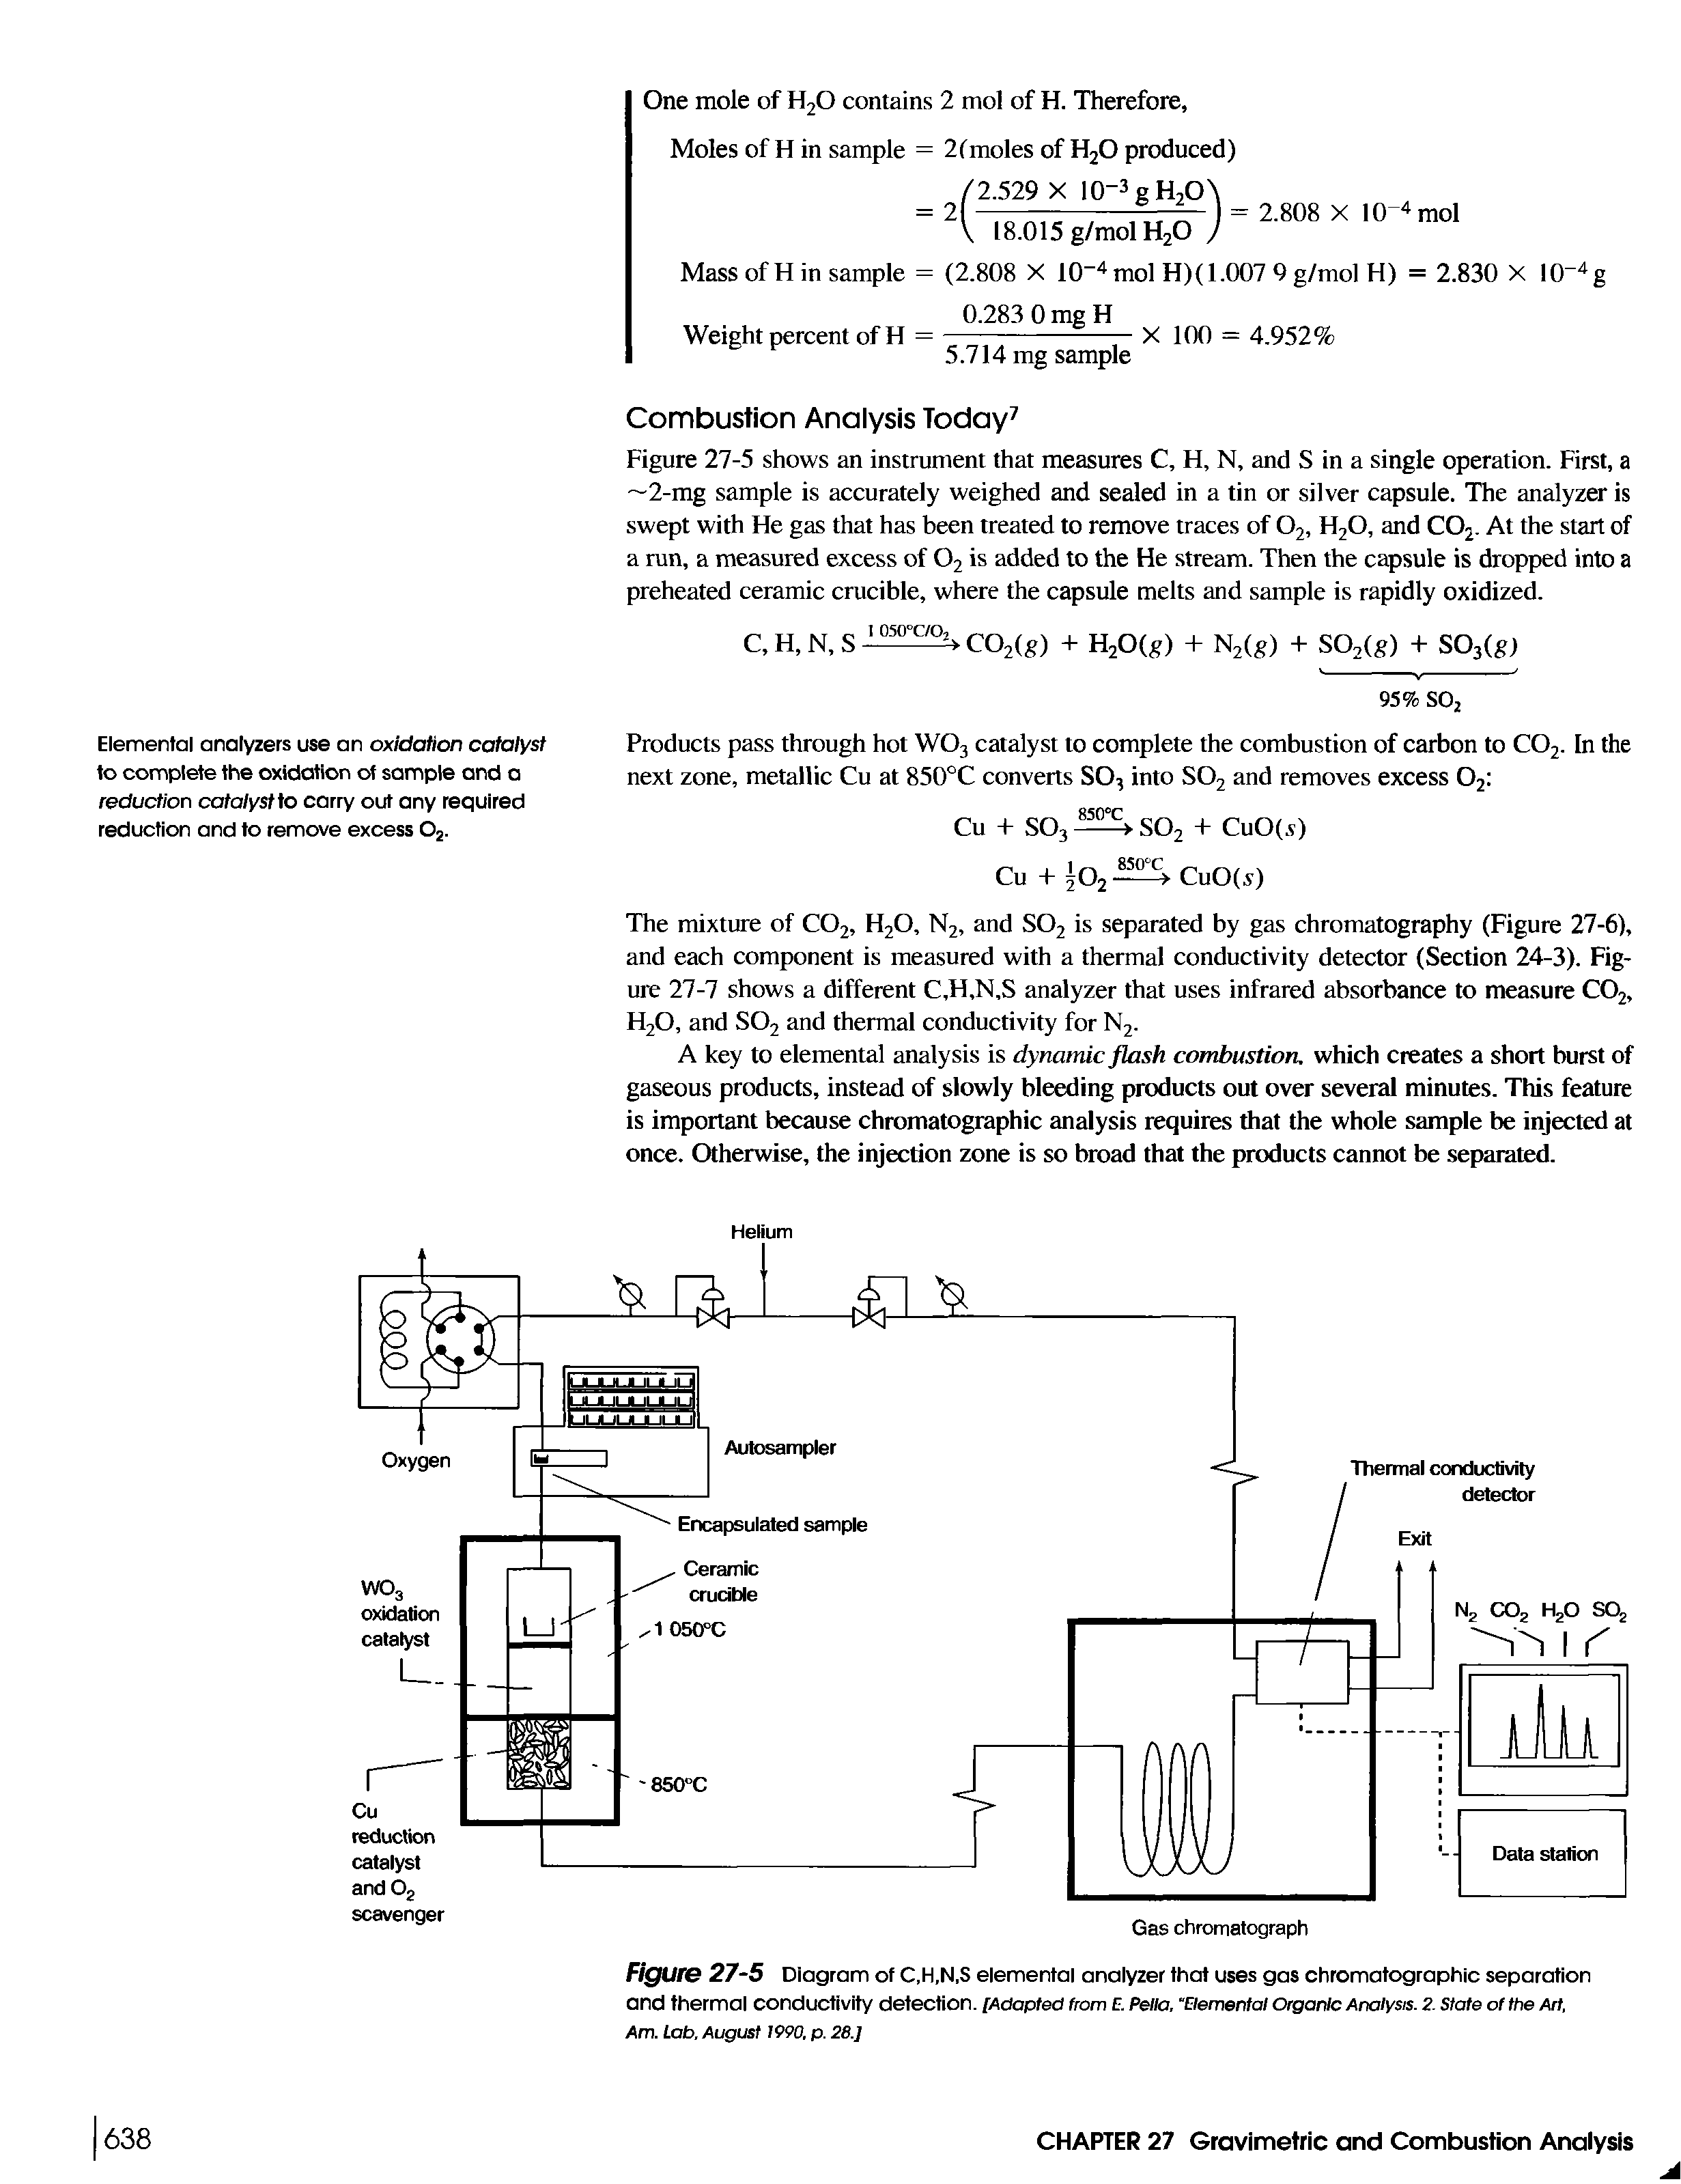 Figure 27-5 Diagram of C.H.N.S elemental analyzer that uses gas chromatographic separation and thermal conductivity detection. [Adapted from E. Pella, Elemental Organic Analysis. 2. State of the Art, Am. Lab, August 1990, p. 28.]...